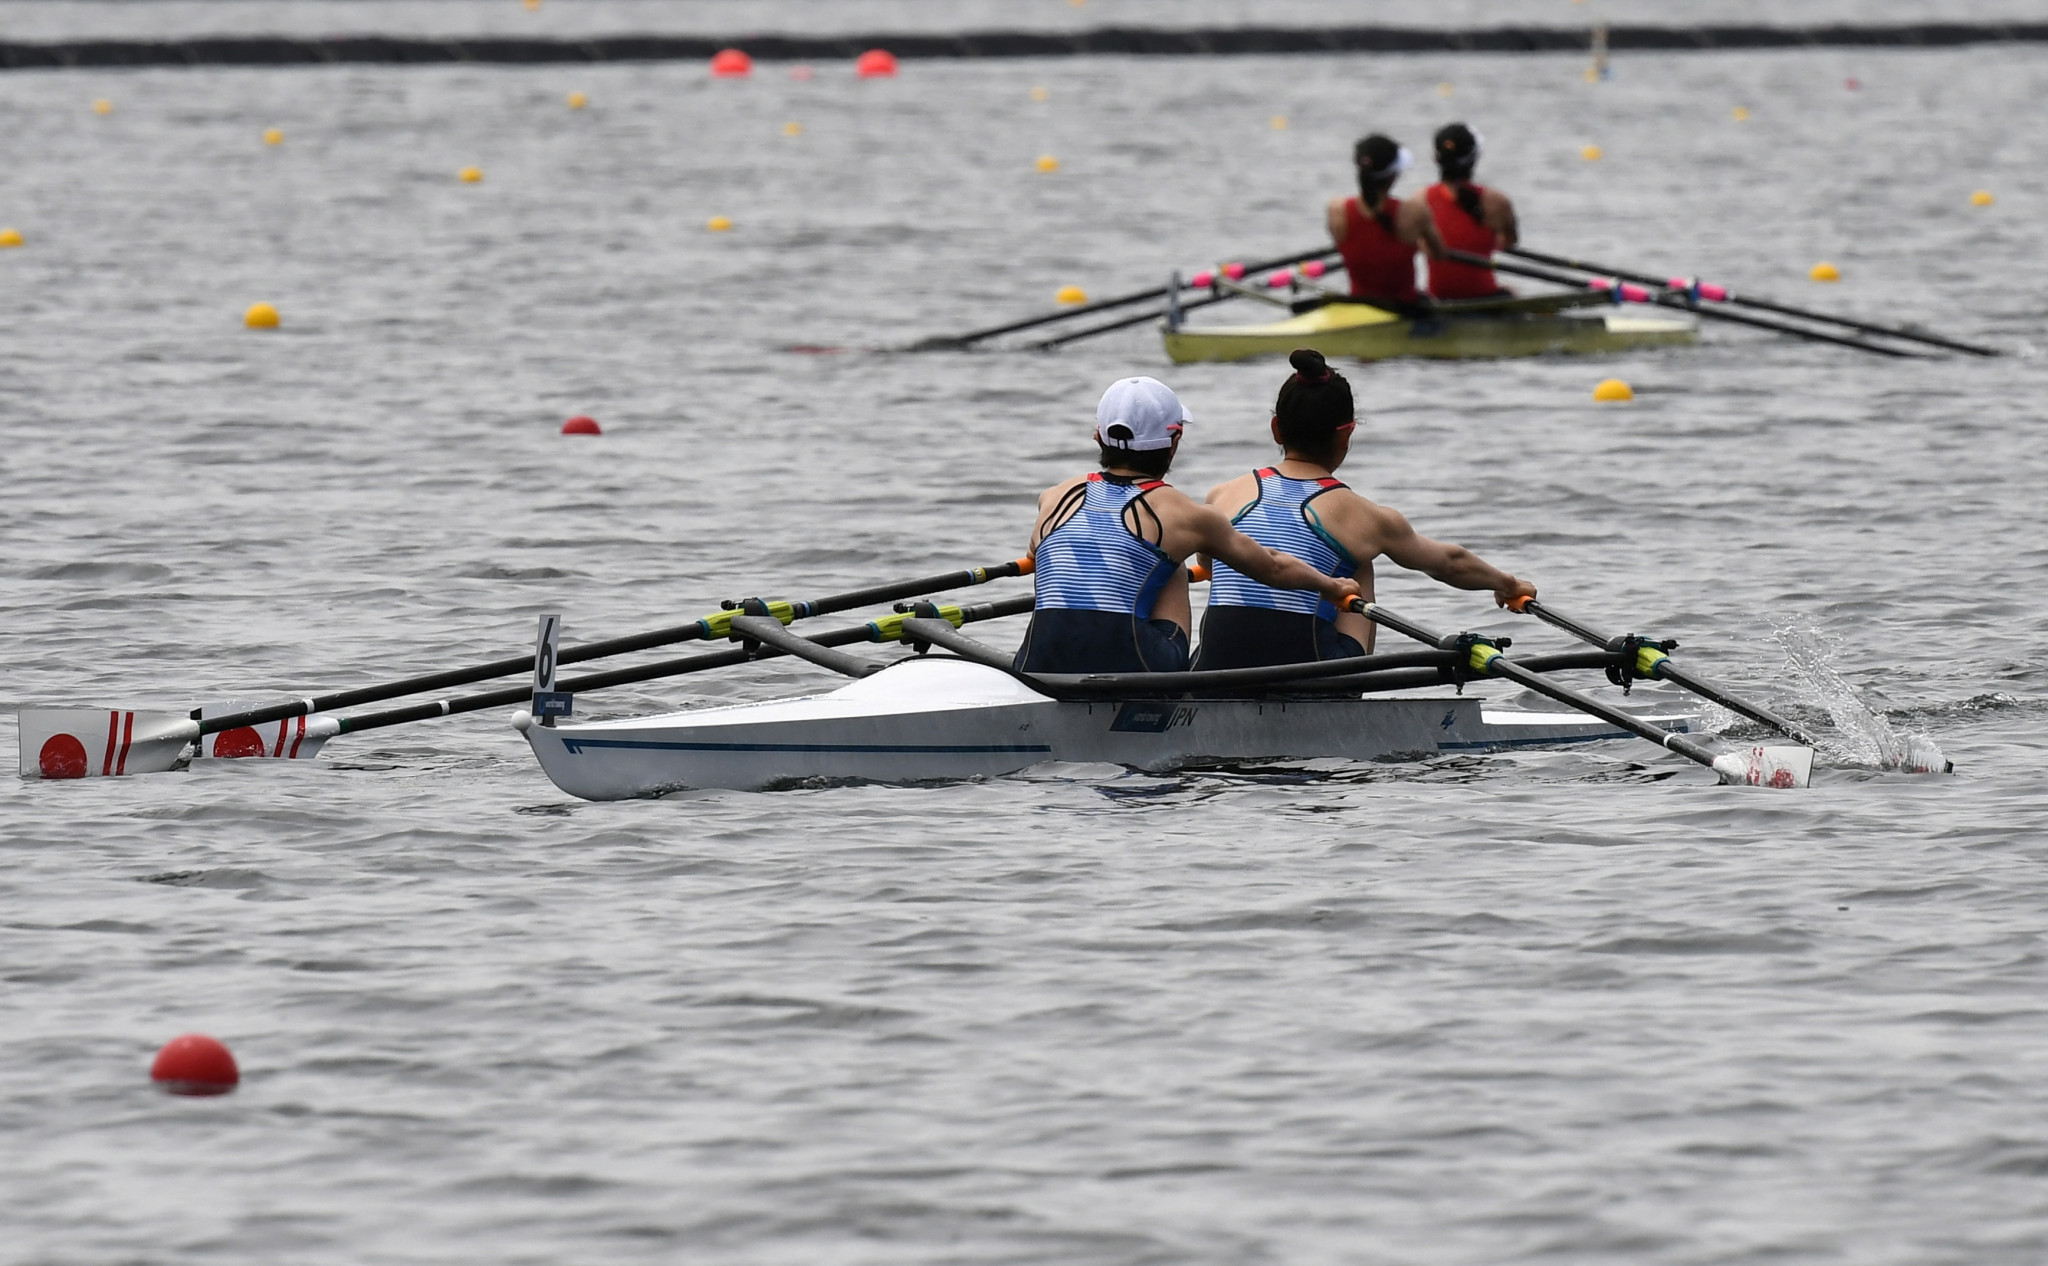 Asia and Oceania Olympic and Paralympic rowing qualifier underway in Tokyo